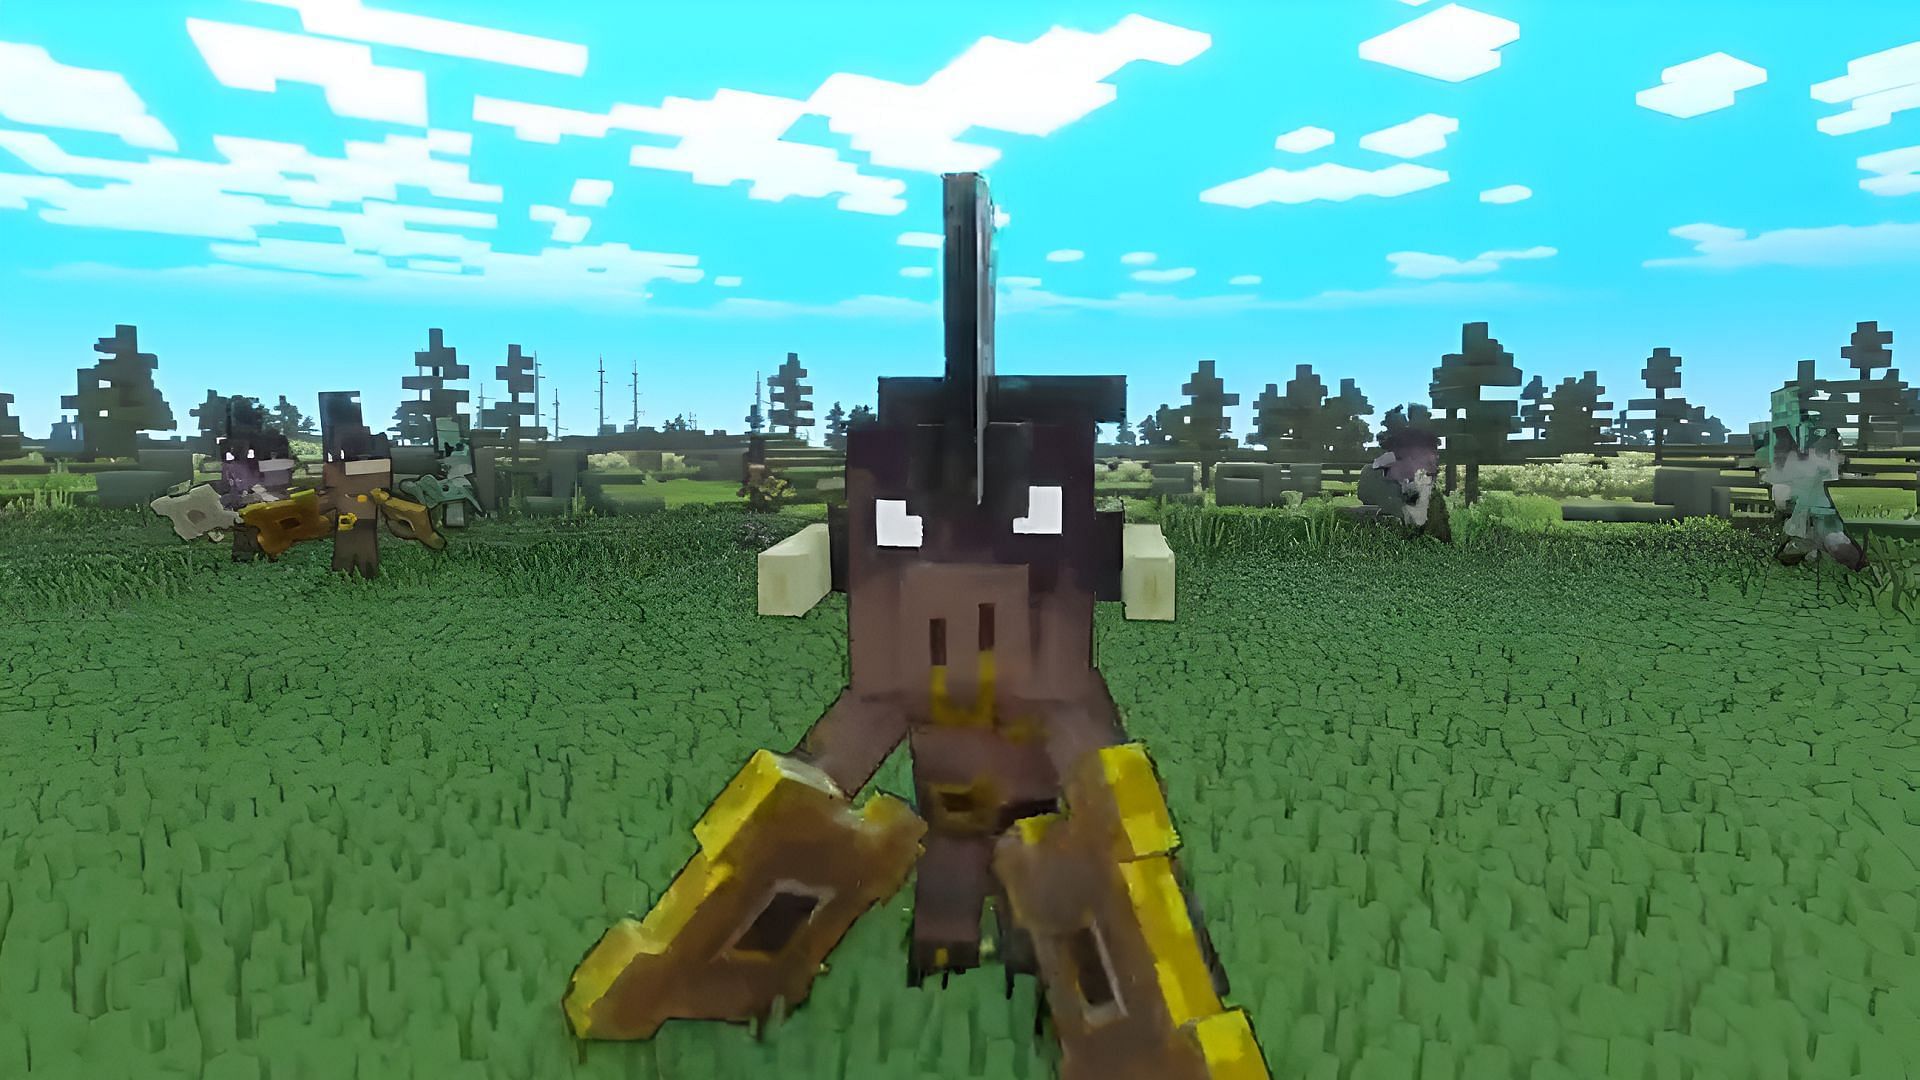 Clankers are the latest addition to the Piglin invasion force (Image via Mojang)